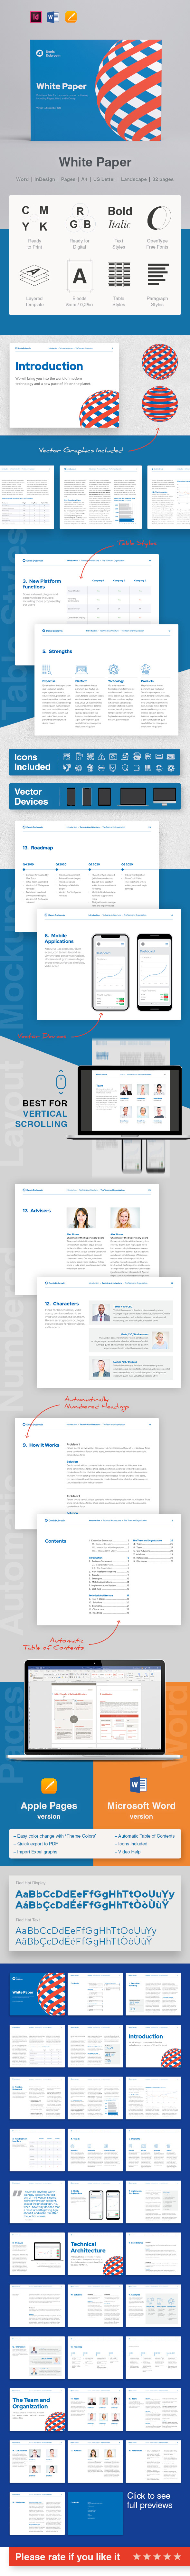 Landscape White Paper Template on Behance Pertaining To White Paper Report Template